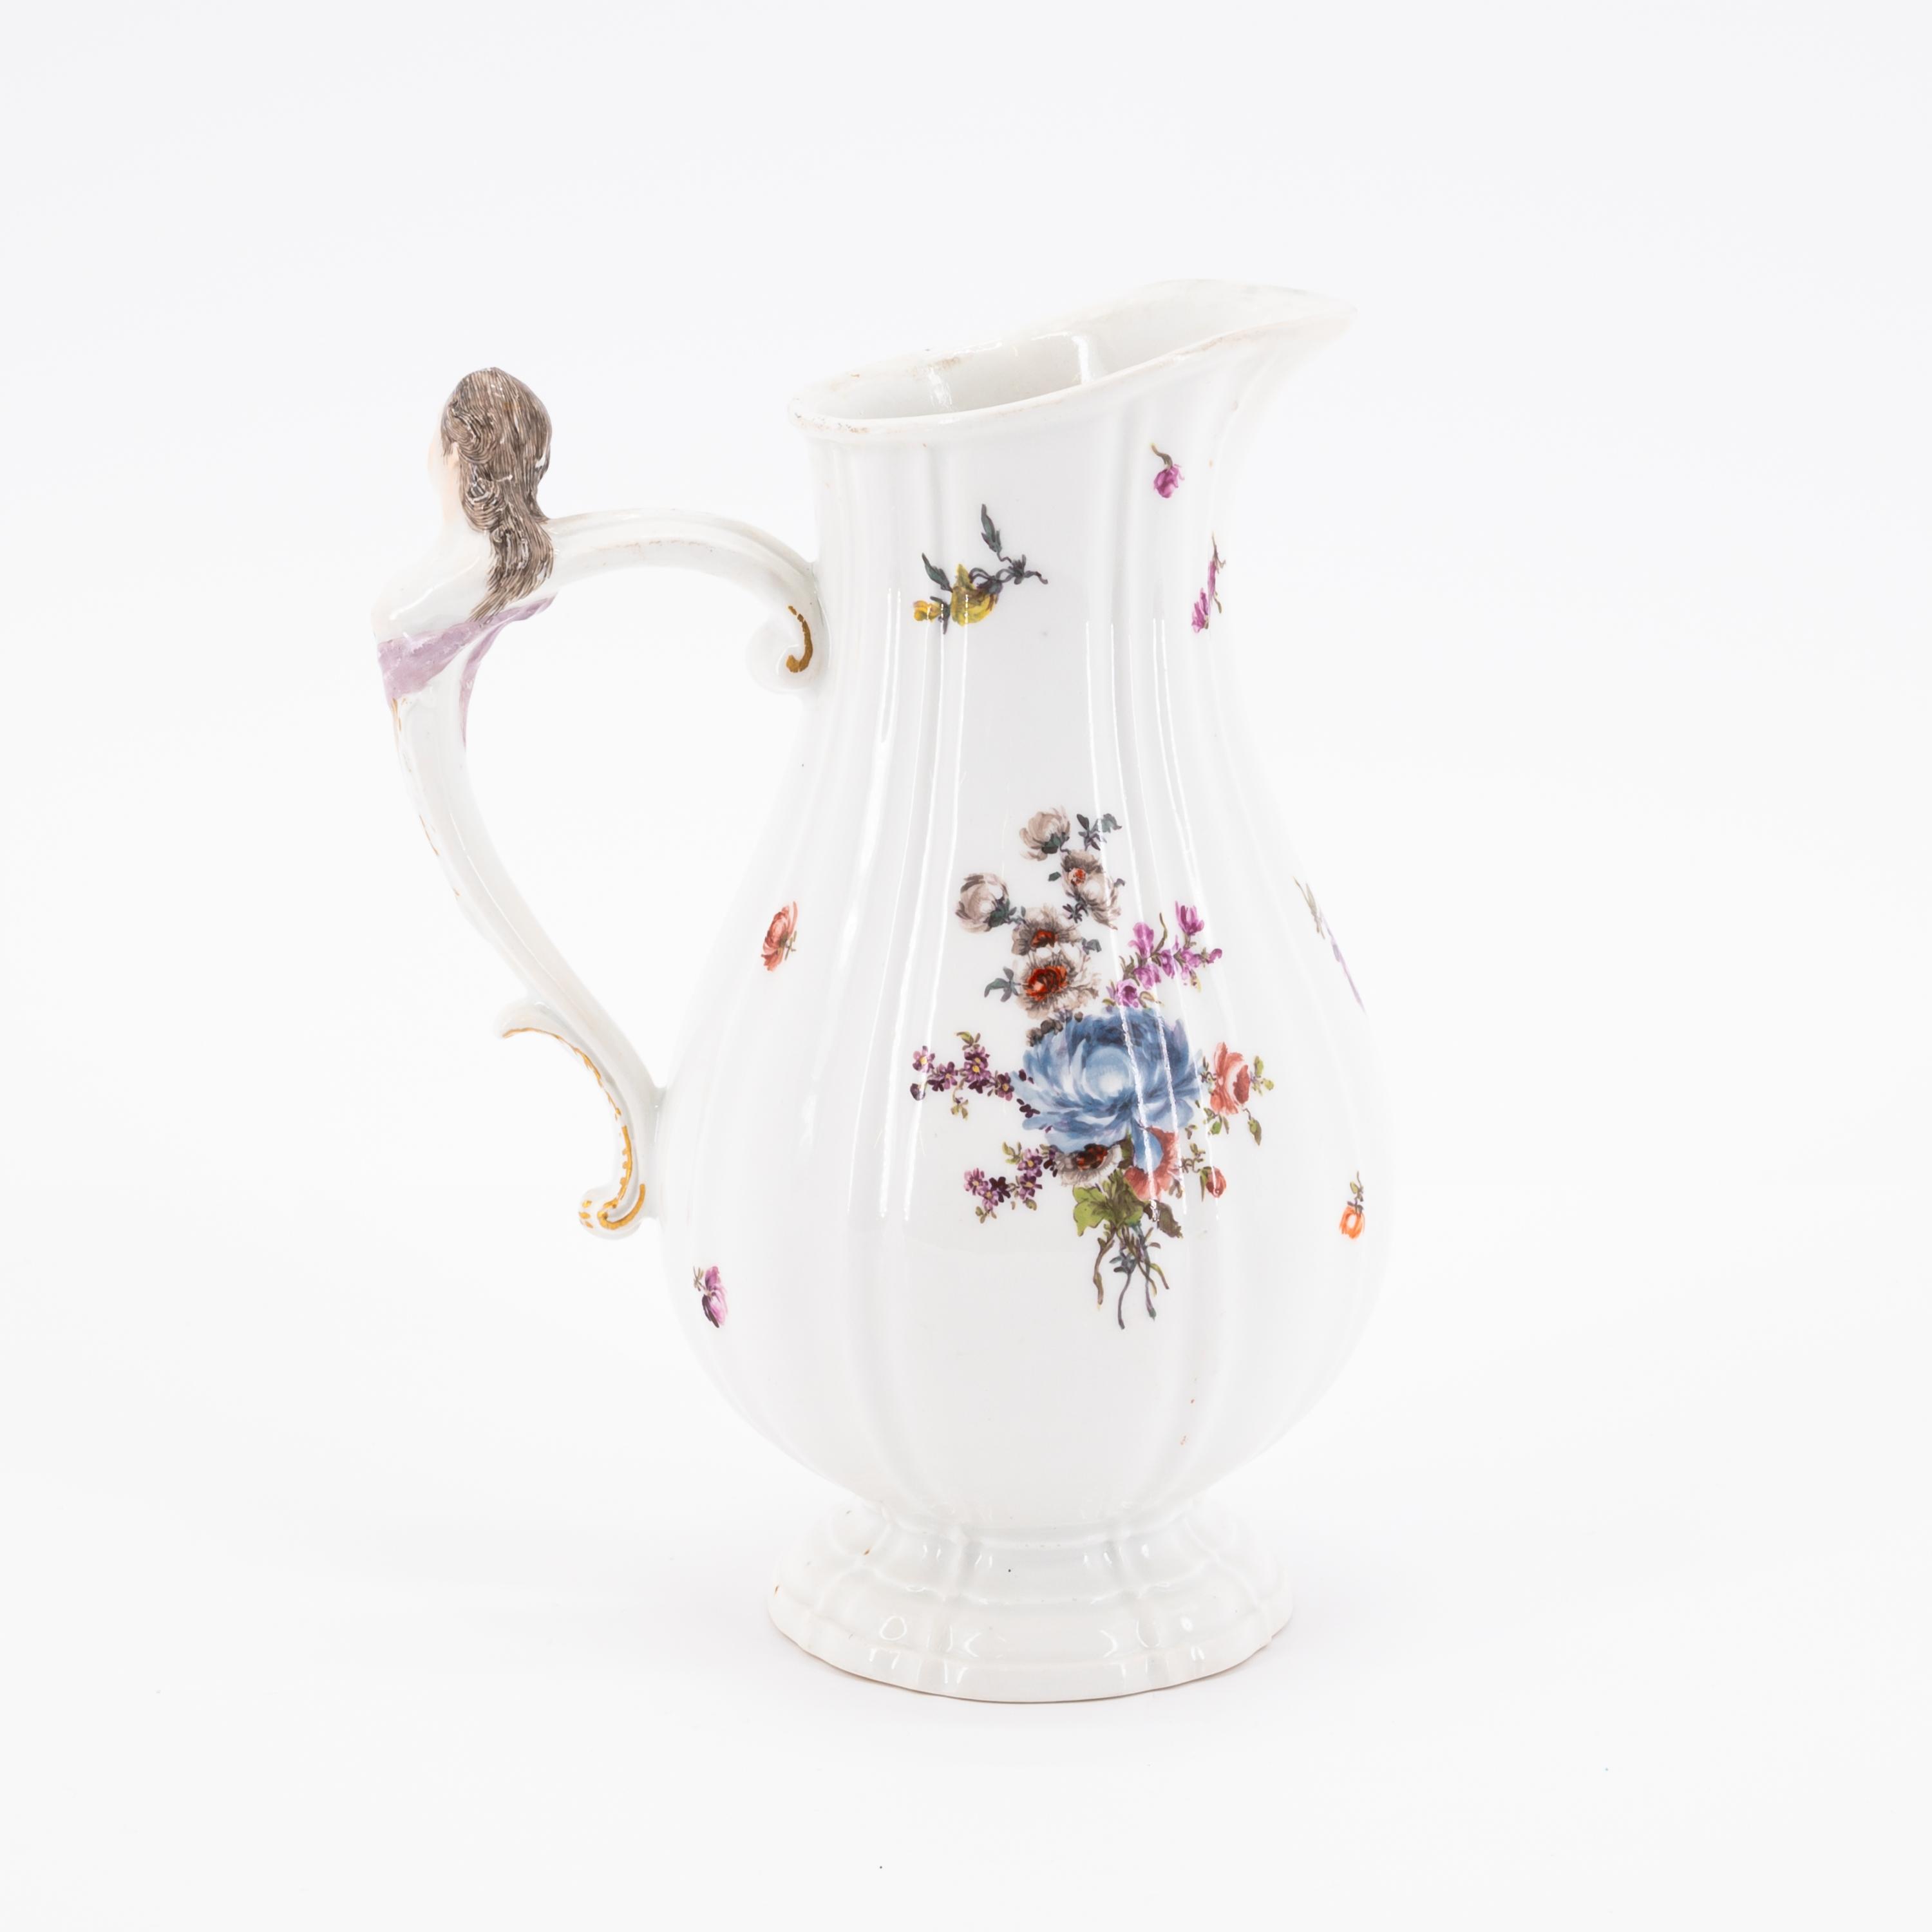 TWO PORCELAIN VASES, ONE MILK JUG AND ONE SMALL BOWL WITH OMBRE FLOWERS - Image 9 of 13